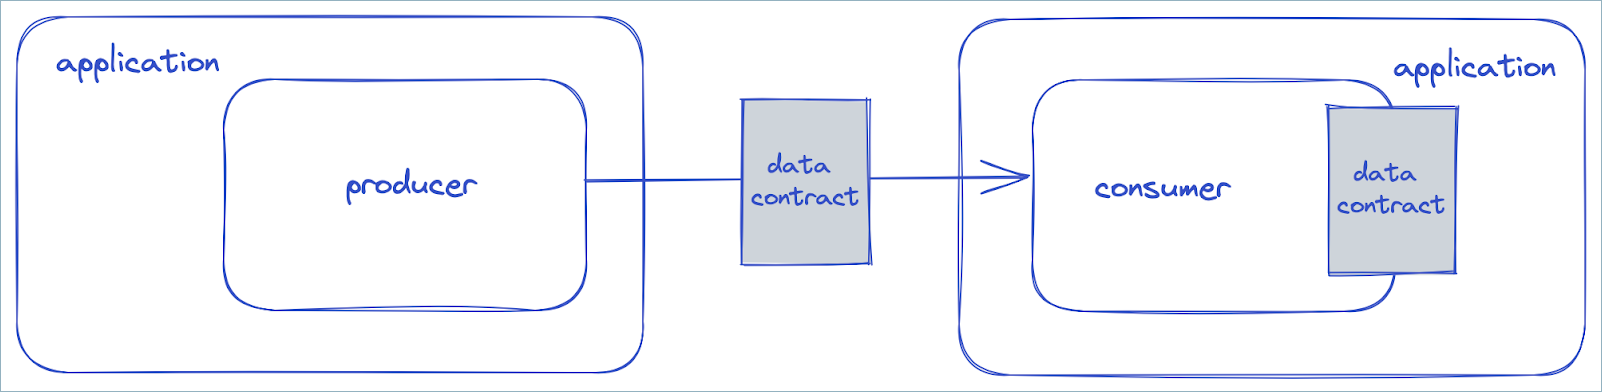 ../../_images/data-contracts.png